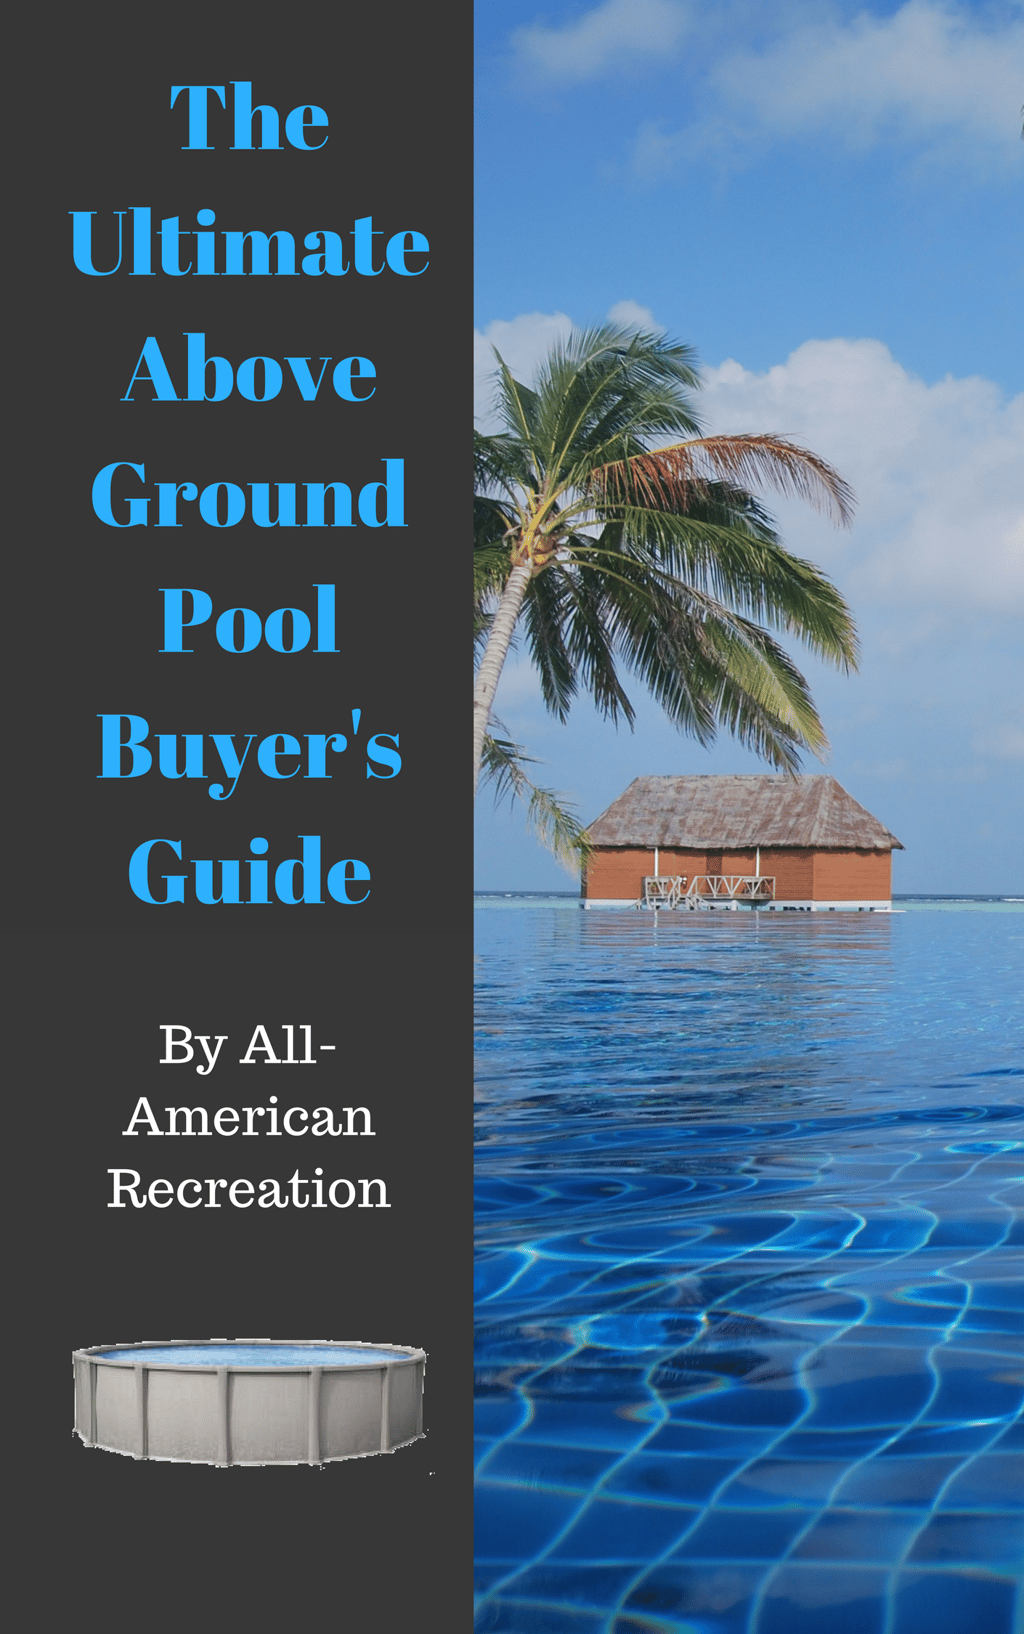 The Ultimate Above Ground Pool Buyer's Guide.png